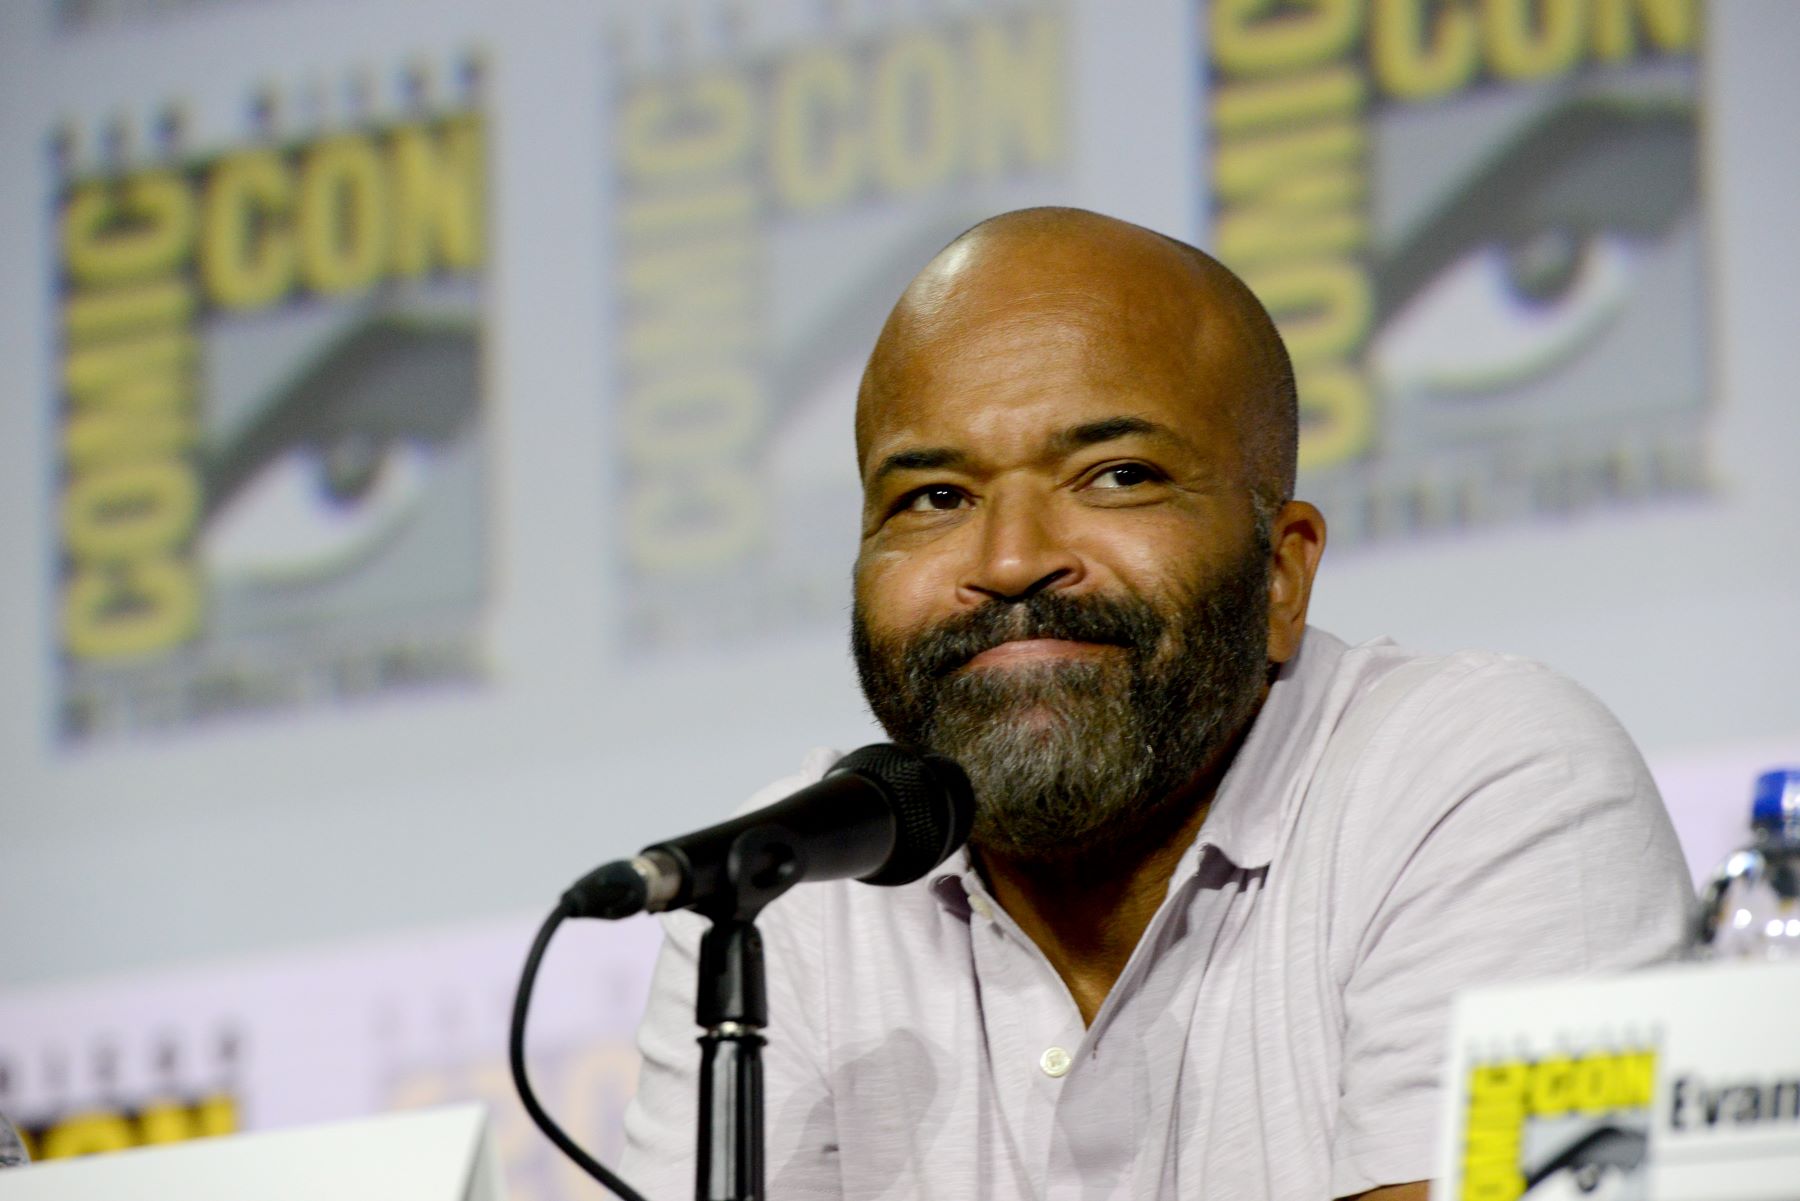 Jeffrey Wright, star of 'Batman: The Audio Adventures,' attends San Diego Comic-Con in 2019.